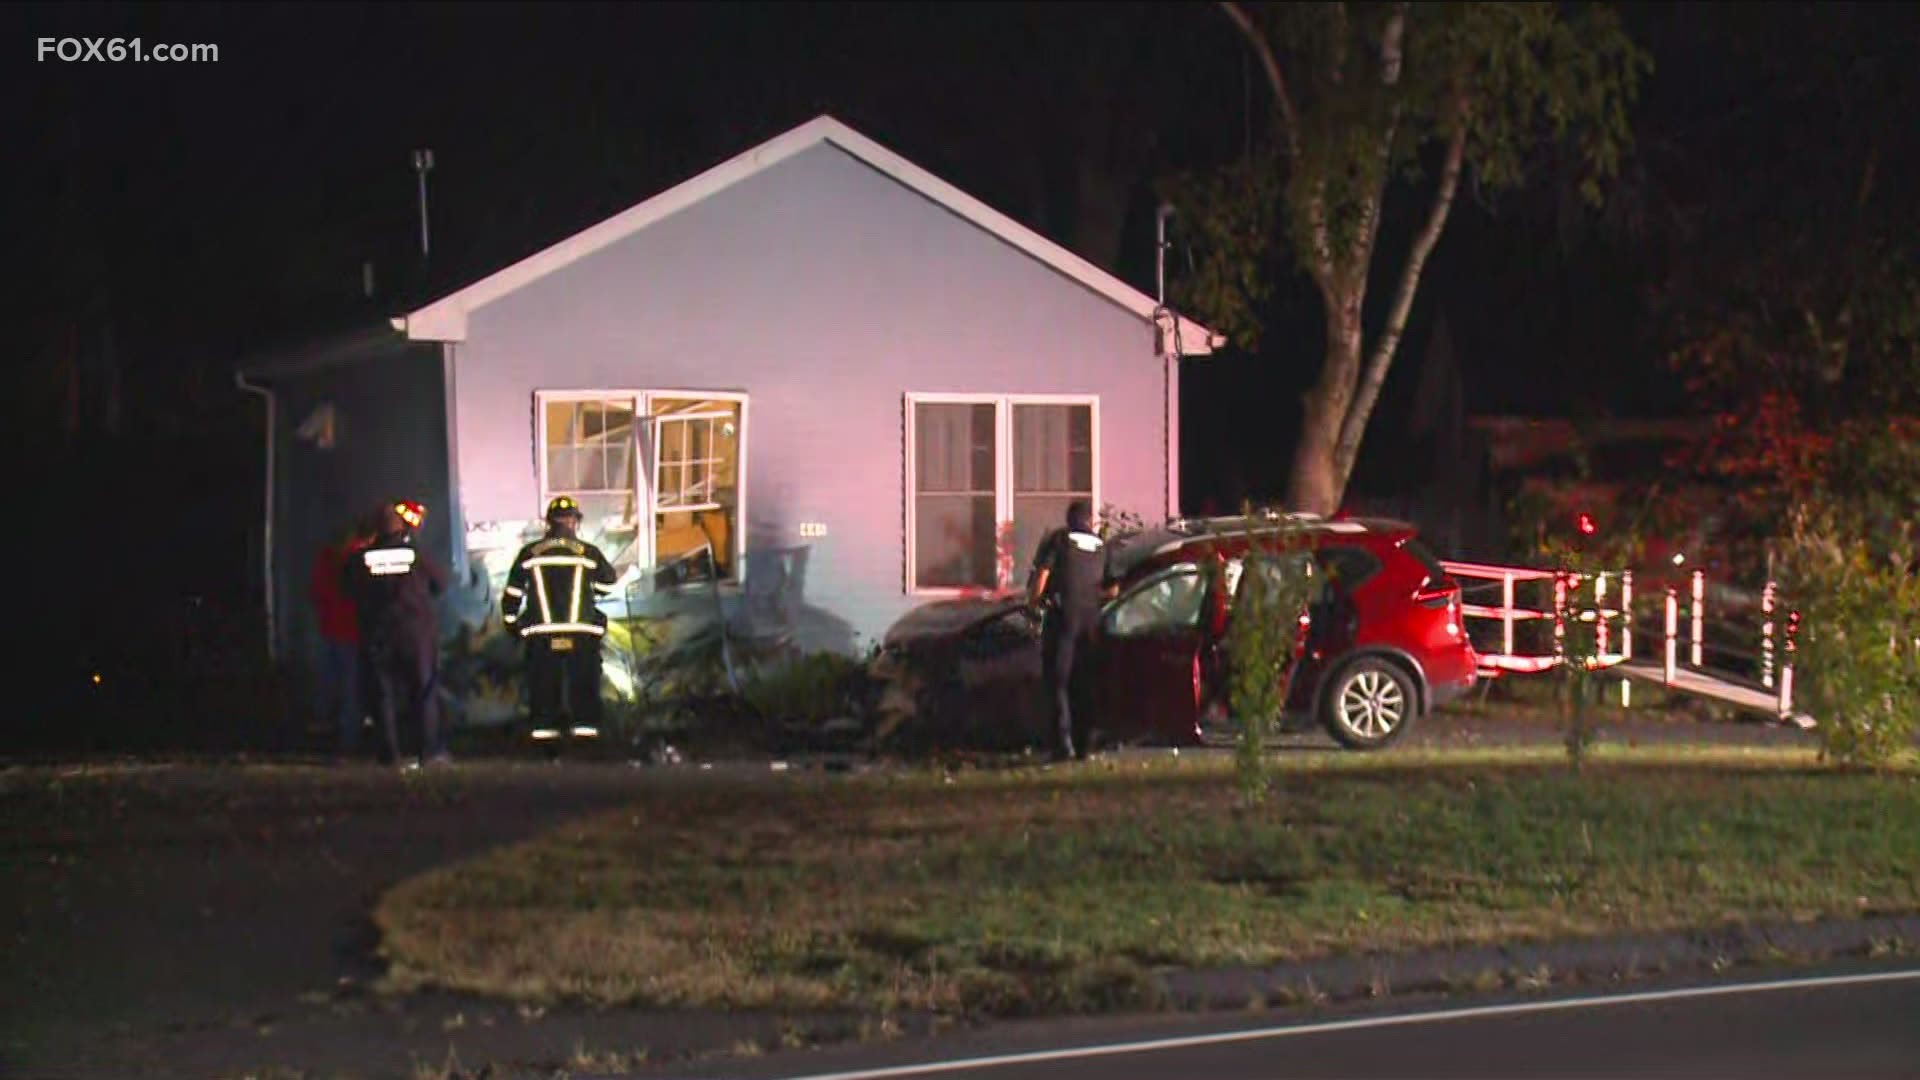 The car slammed into a house on Meriden Avenue Thursday night. It is unclear if anyone was injured in the crash.